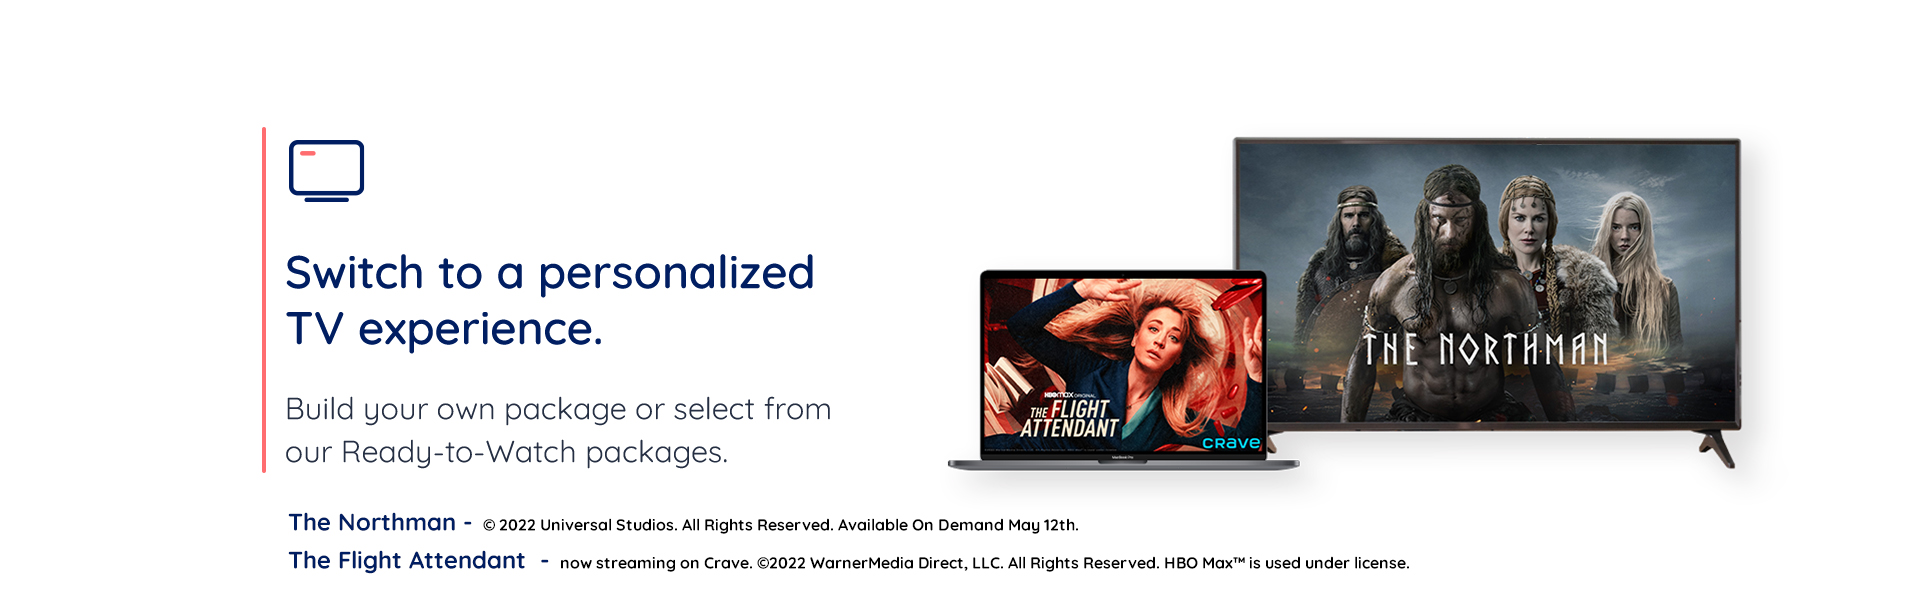 Switch to a personalized TV experience. Build your own package of select from our Ready-to-Watch packages.